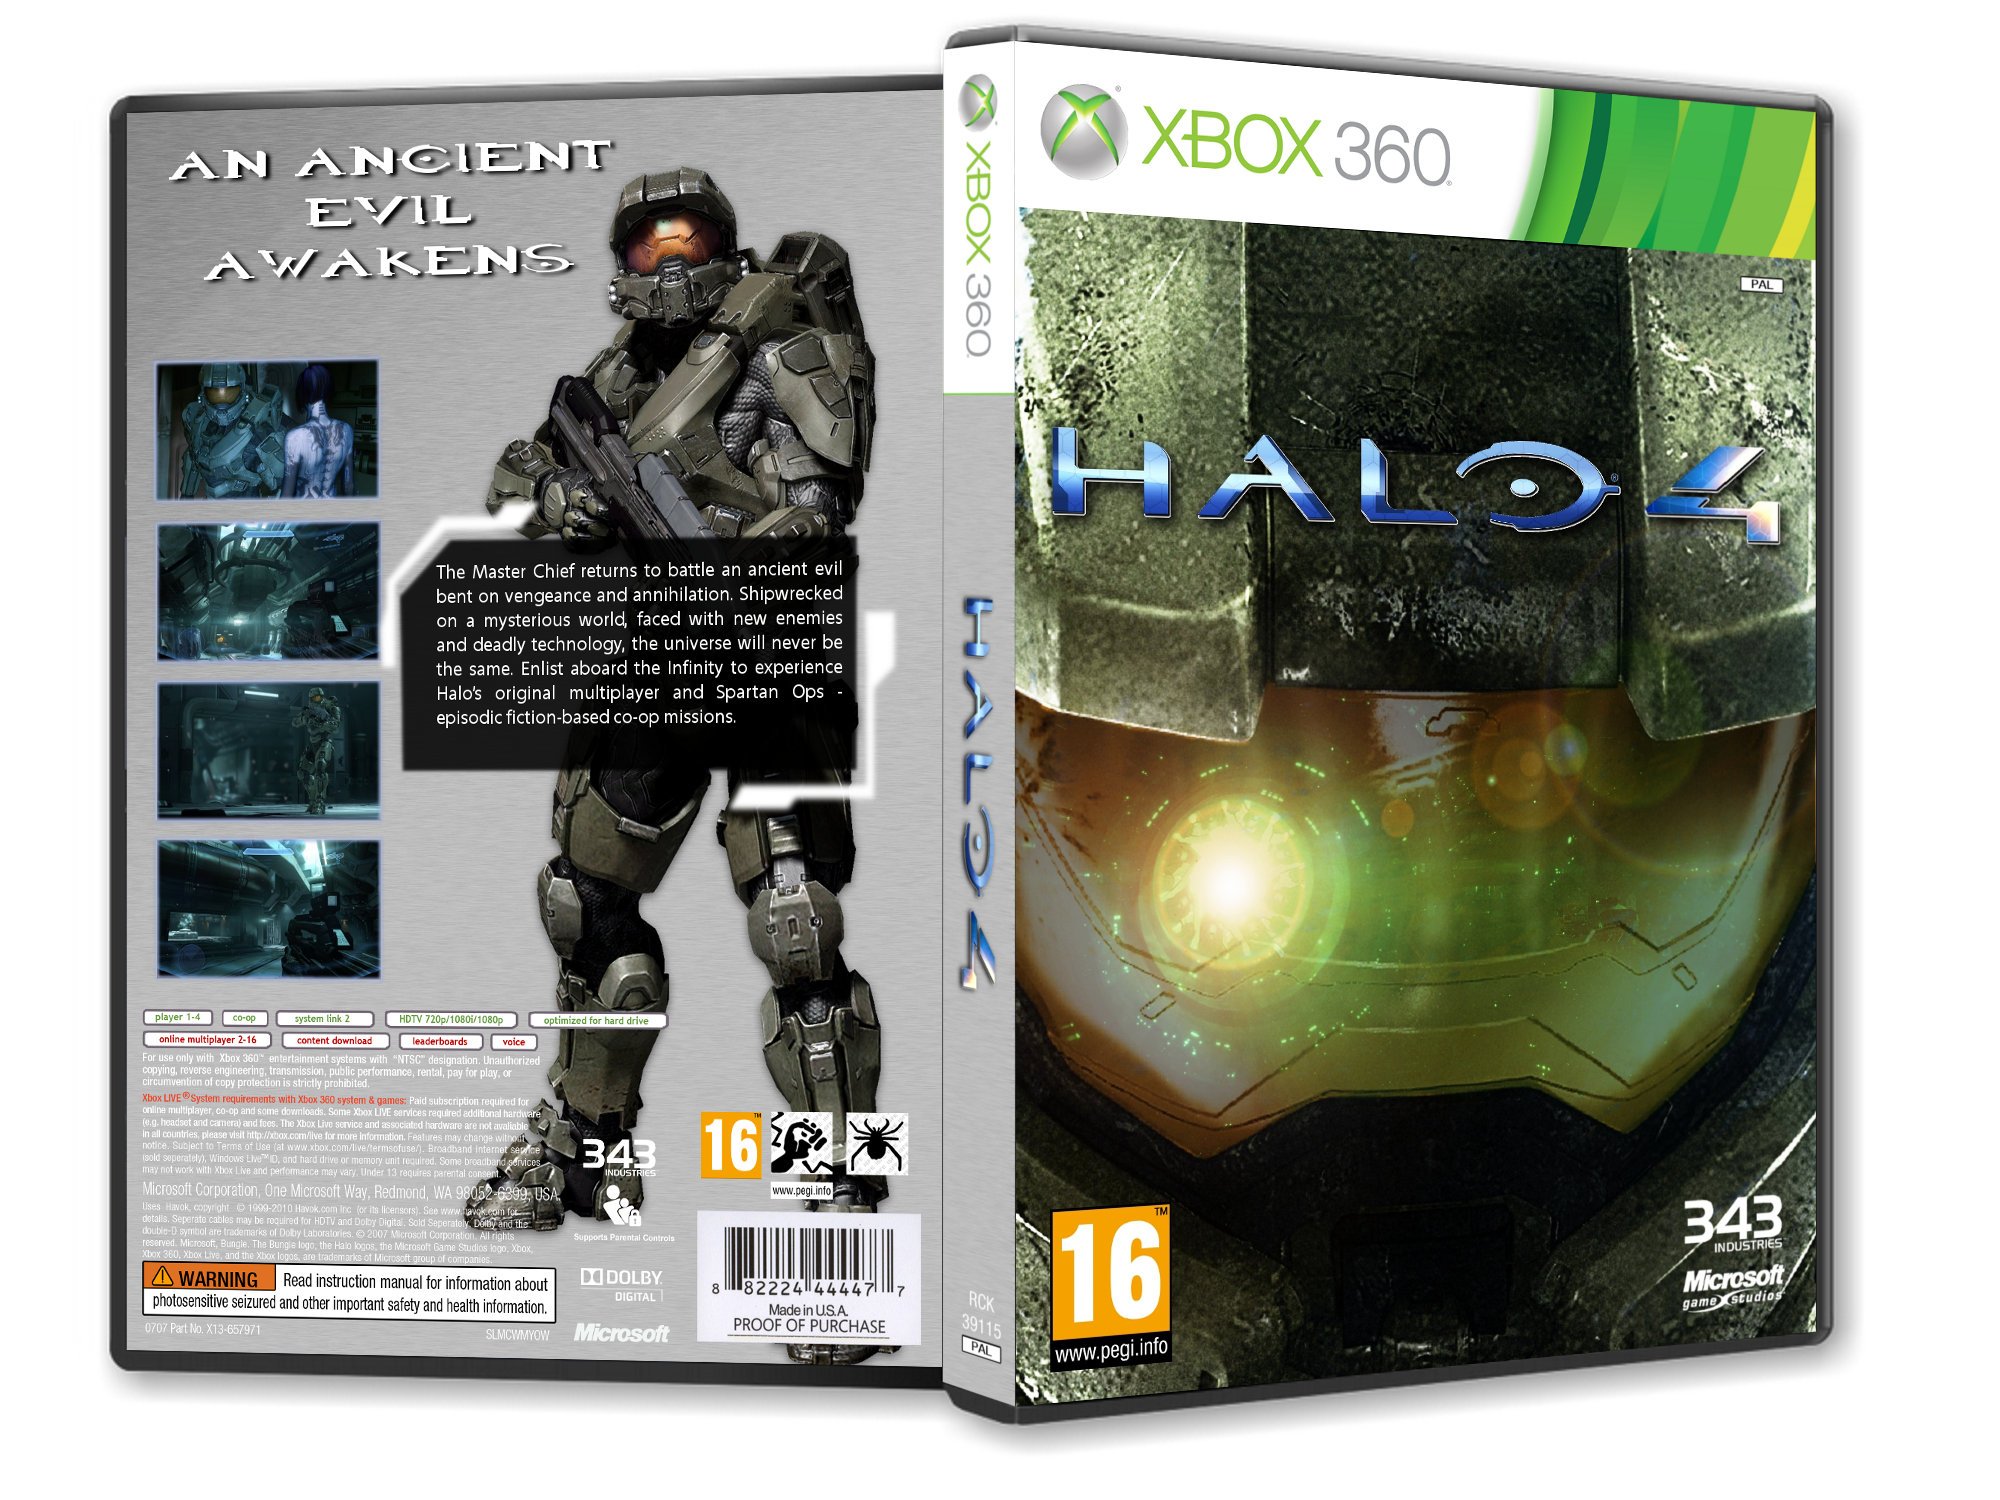 Viewing full size Halo 4 box cover